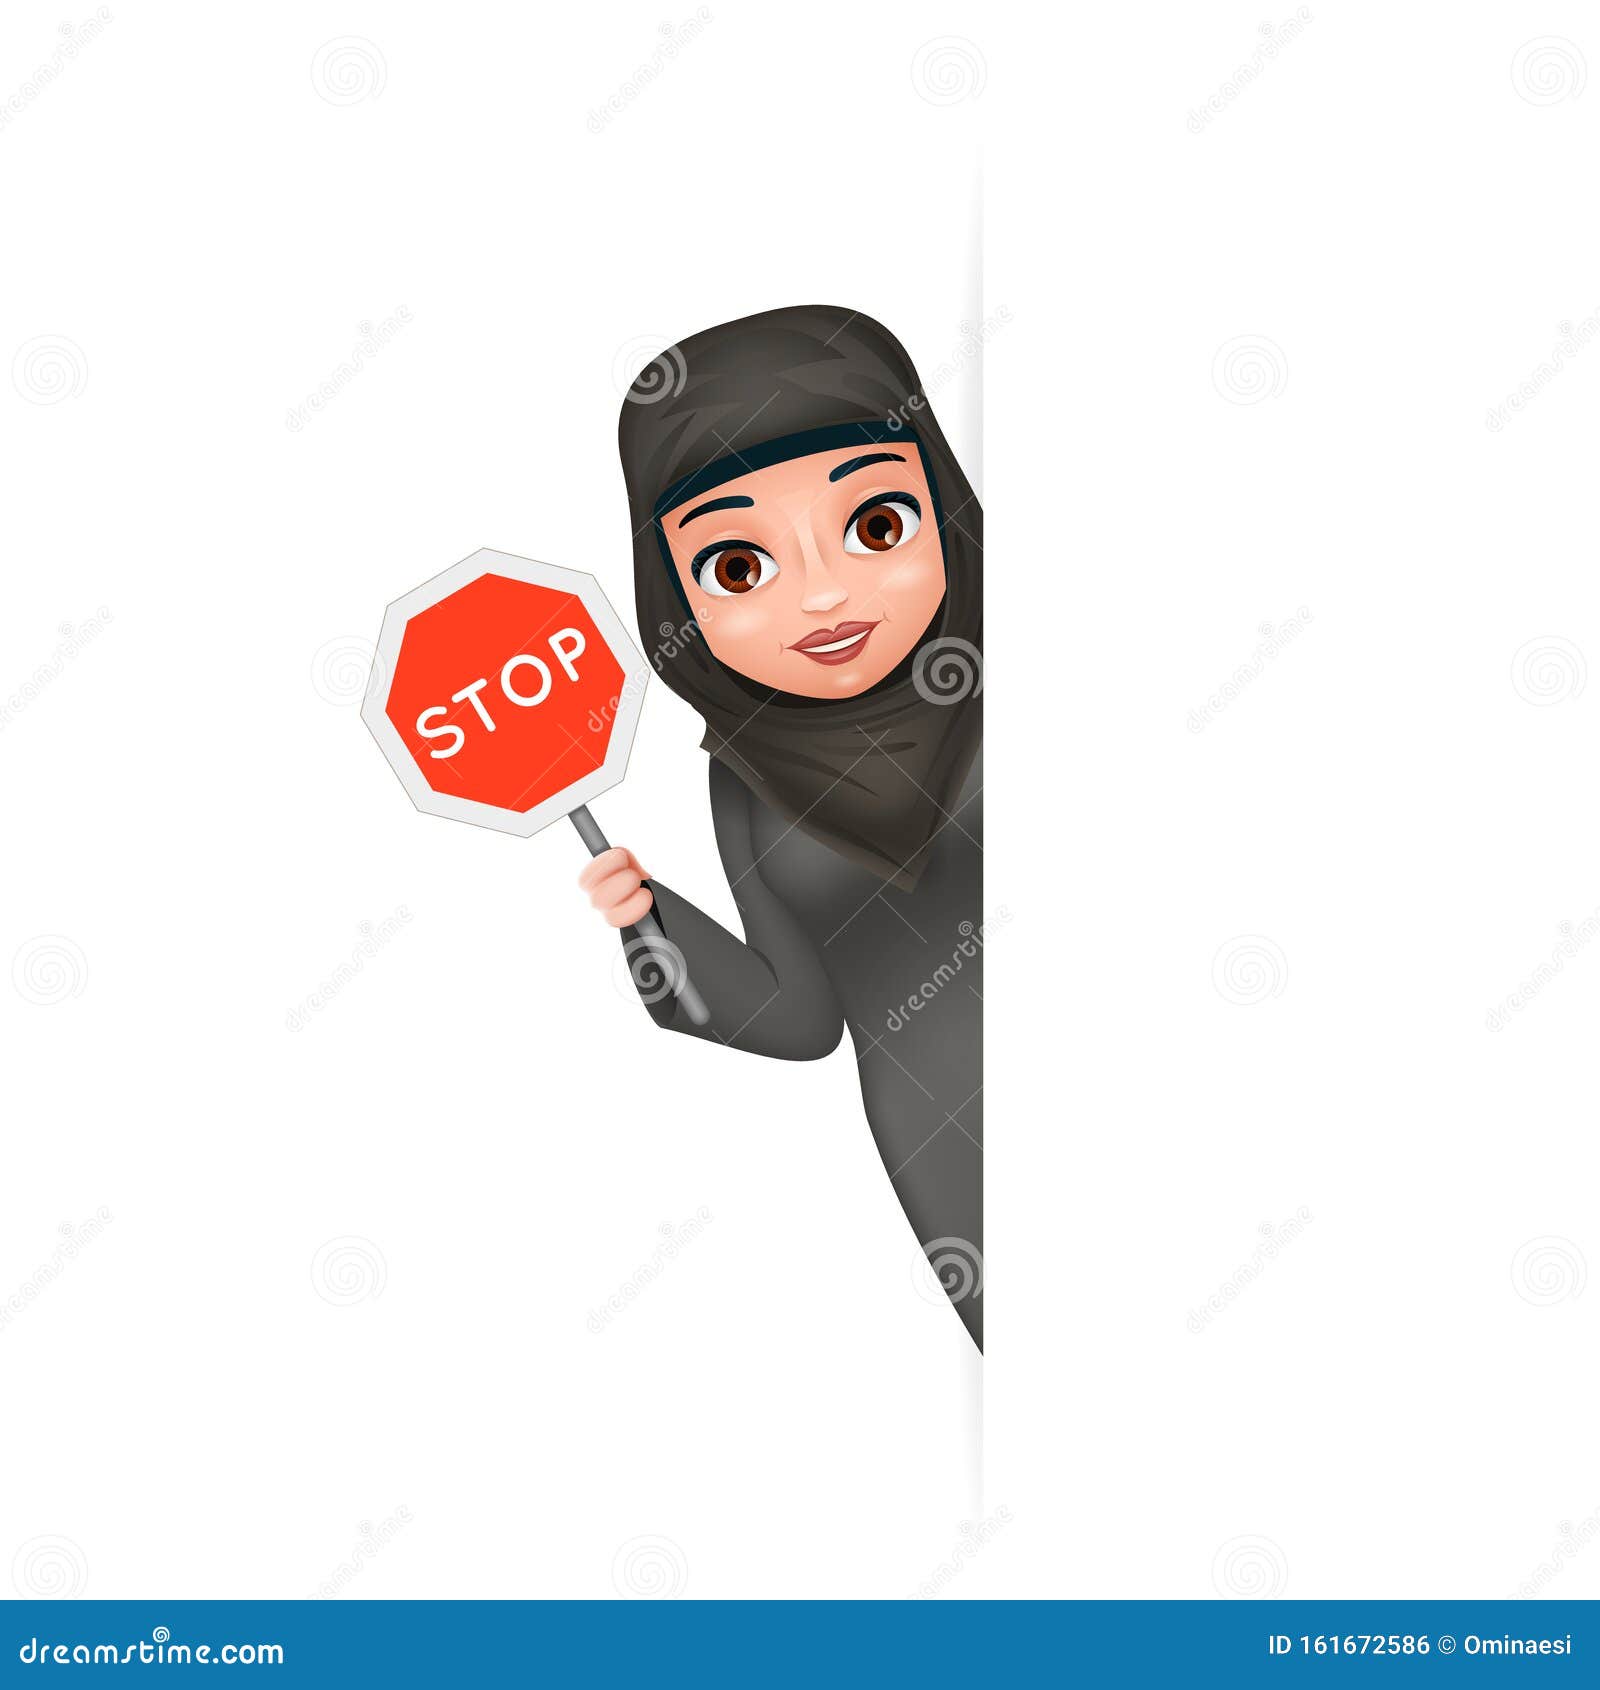 look out corner protest fight for equal rights stop sign arabe tradicional female clothing hijab abaya 3d cute cartoon